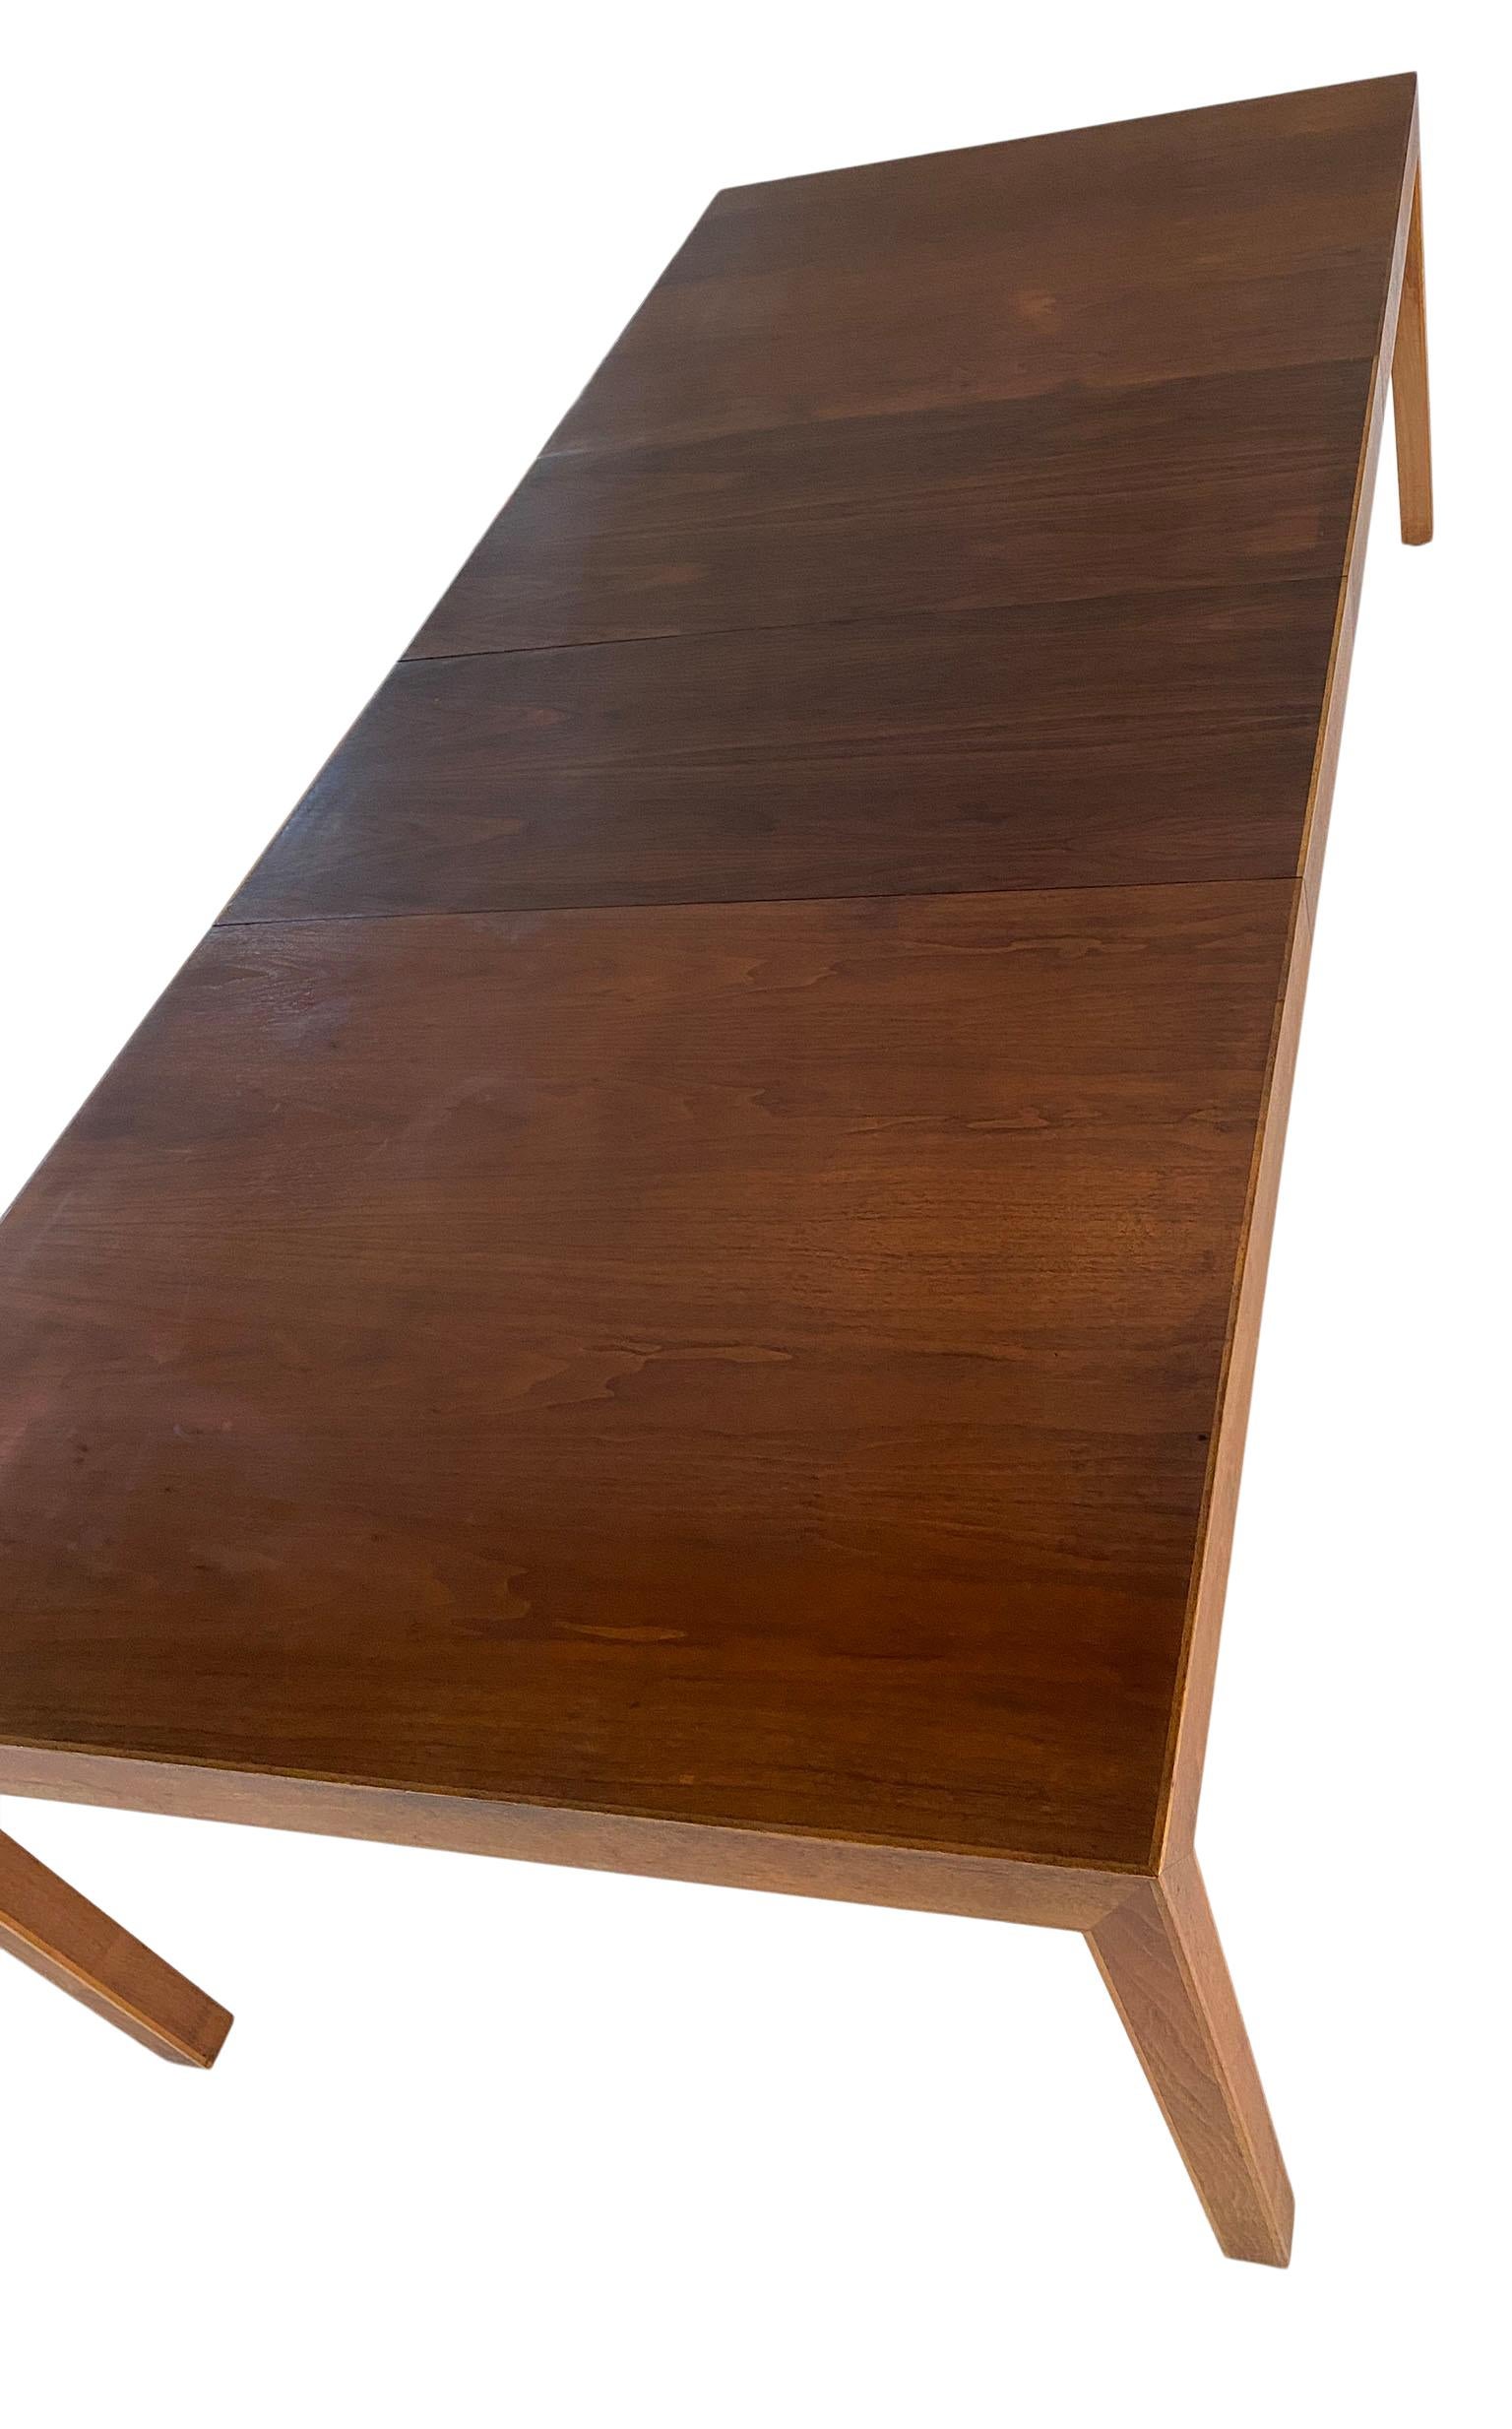 Midcentury Milo Baughman Walnut Expandable Parsons Dining Table with '2' Leaves 1